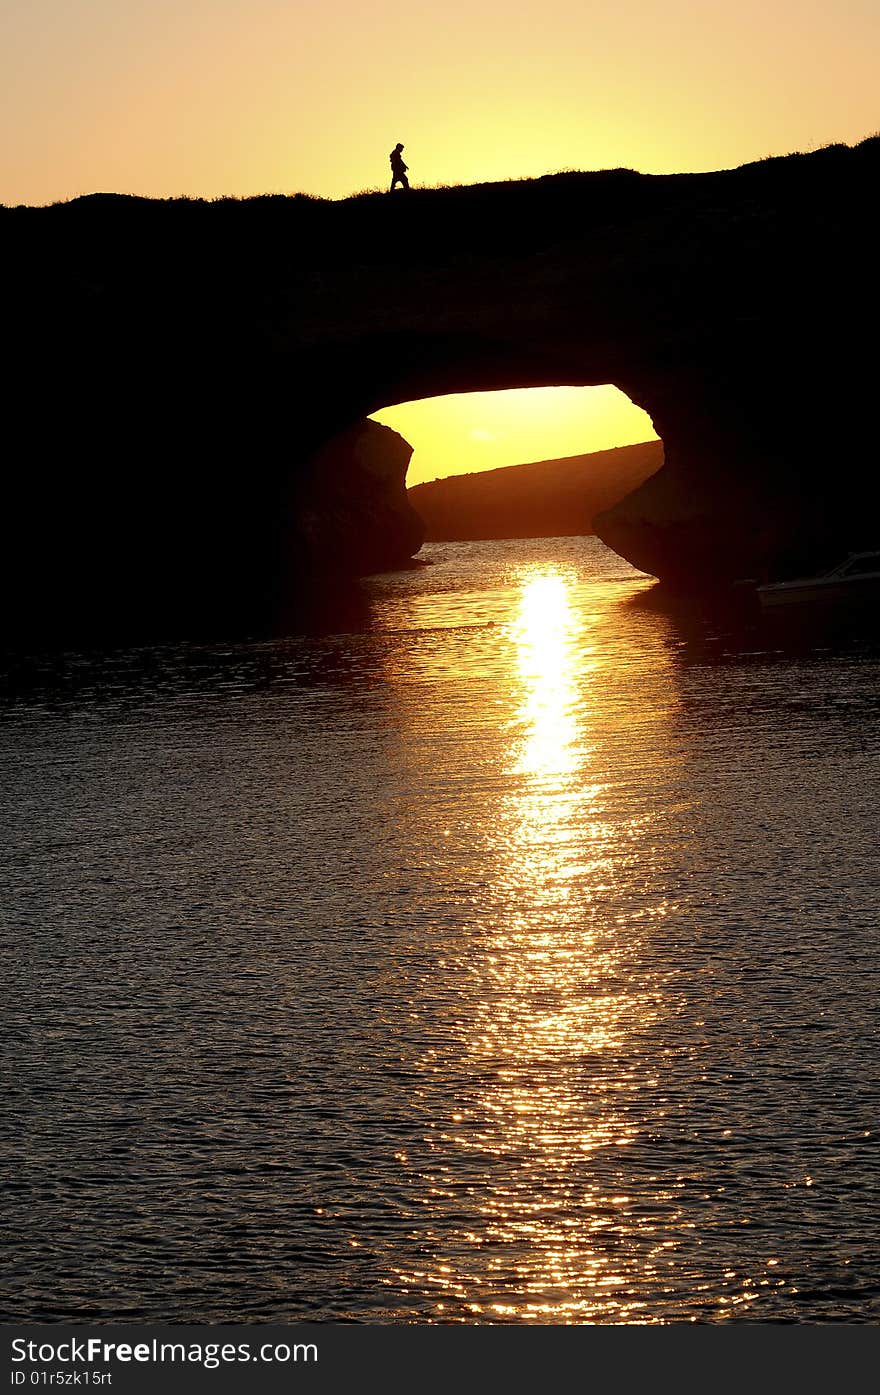 Sunset over the sea on mediterranean island, somebody is walking over a rocky arch. Sunset over the sea on mediterranean island, somebody is walking over a rocky arch